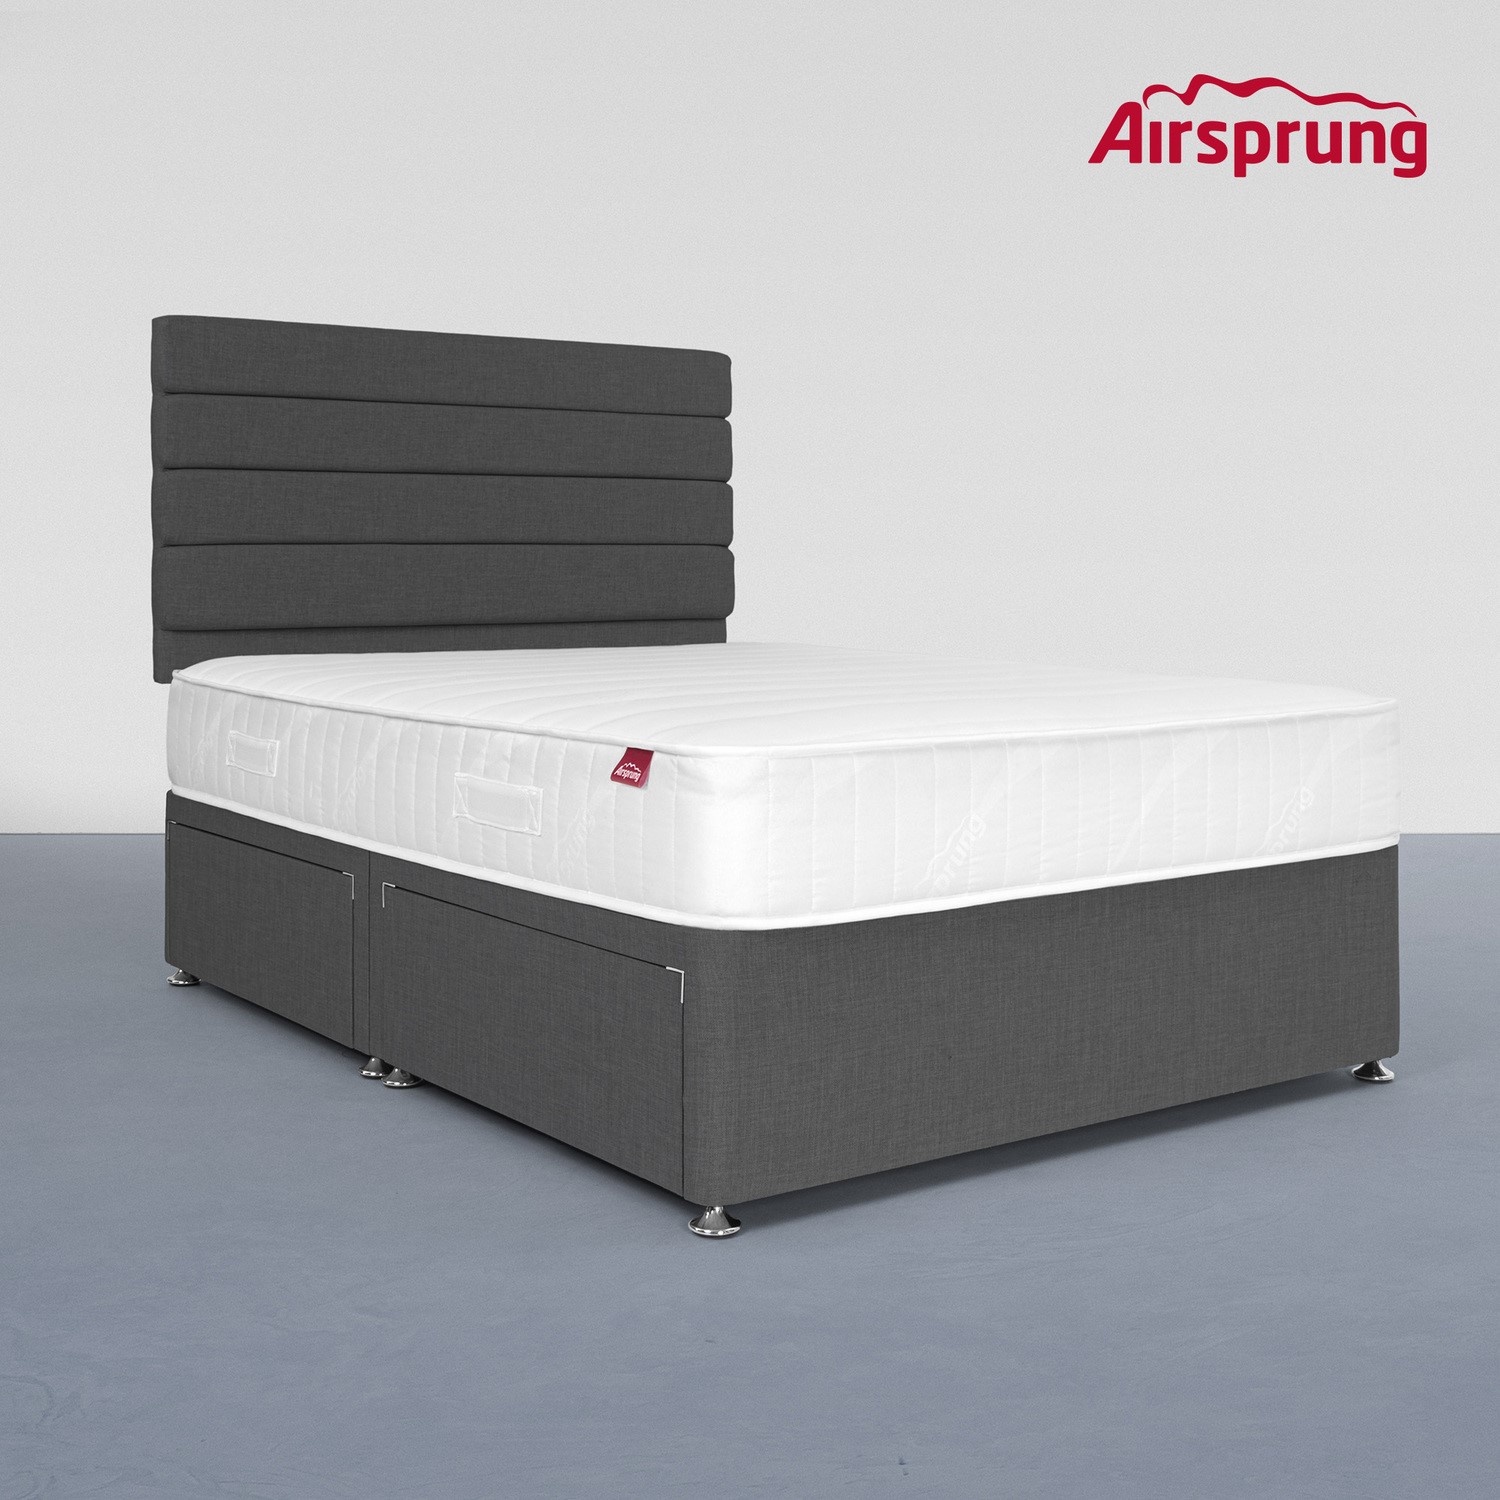 Photo of Airsprung king size 4 drawer divan bed with comfort mattress - charcoal